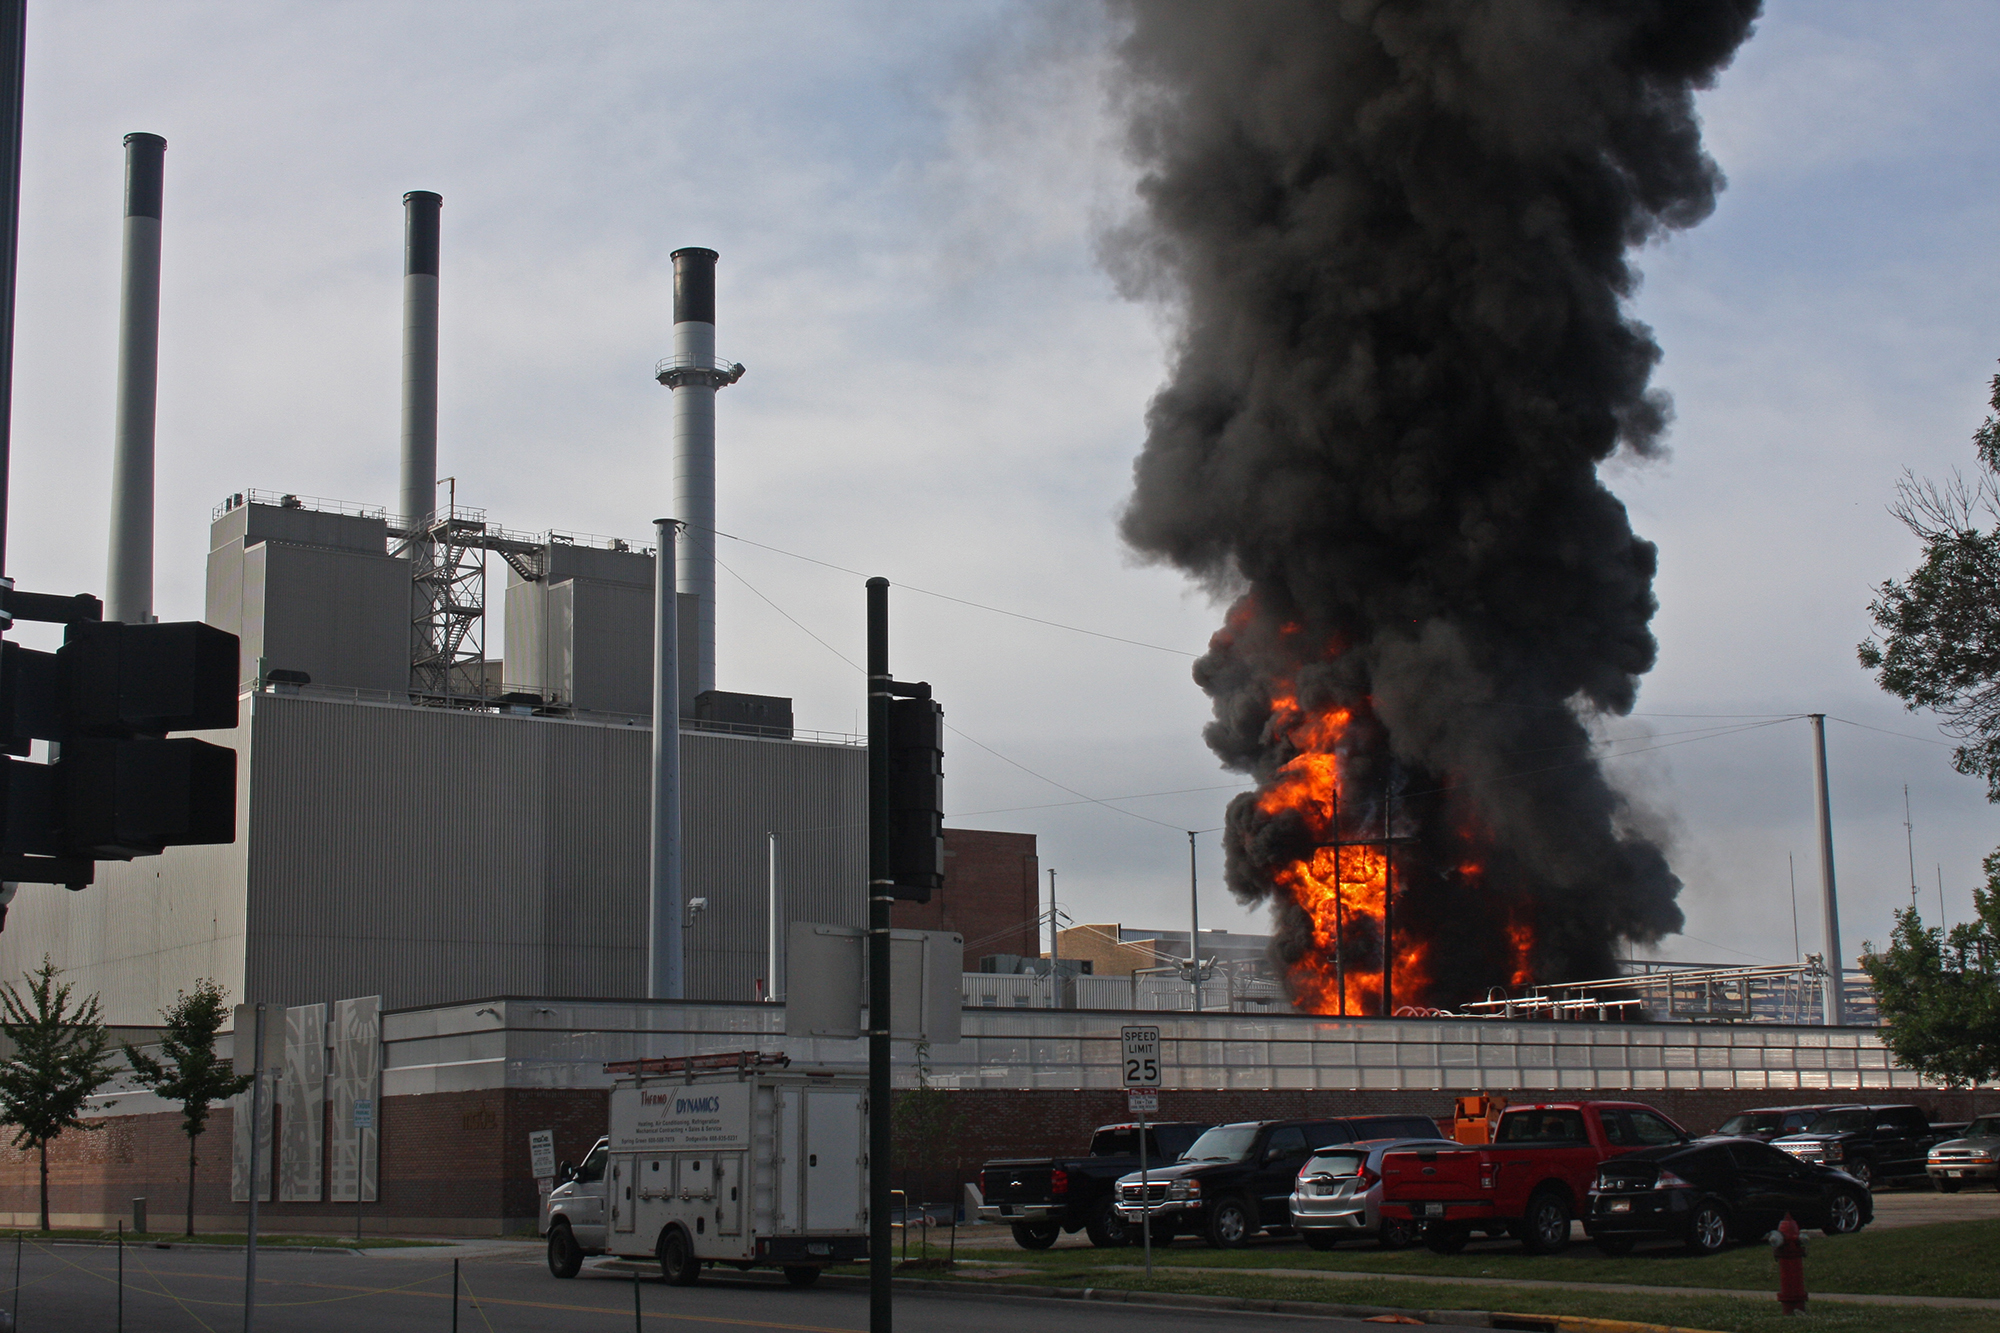 Fires At Madison Power Substations Leave Thousands Without Power